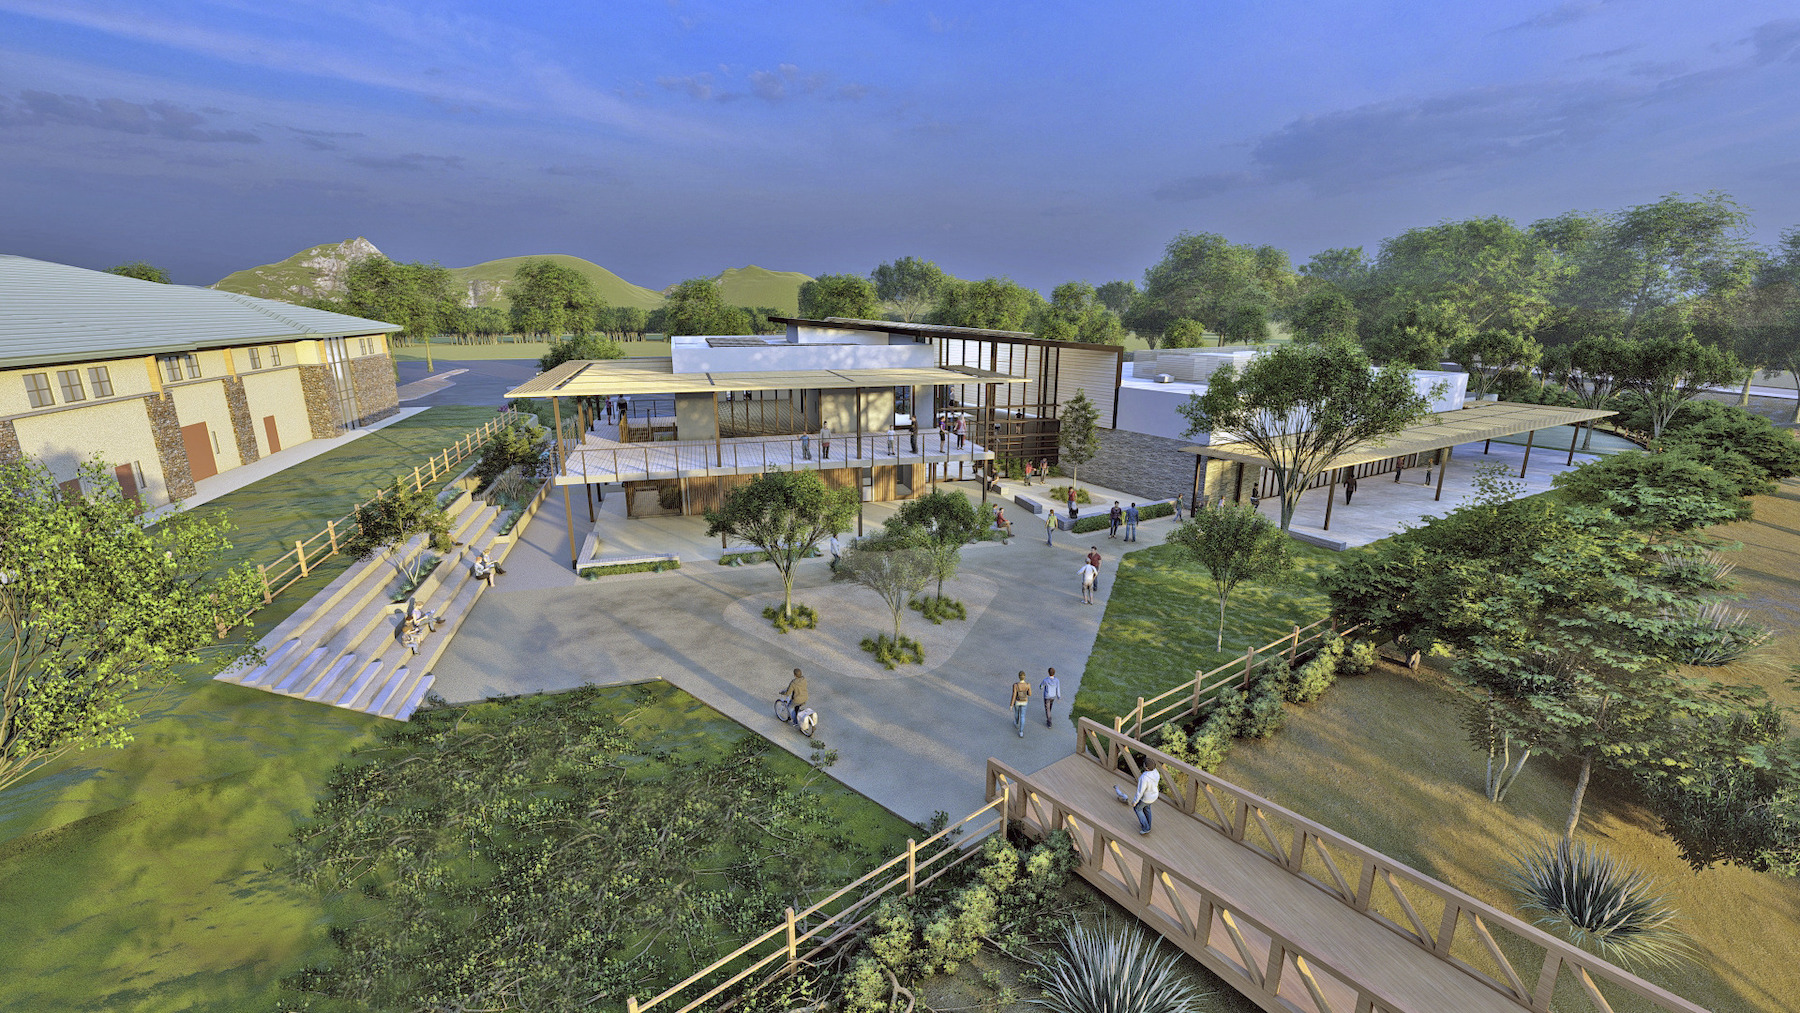 HMC Architects' report on the importance of community centers in